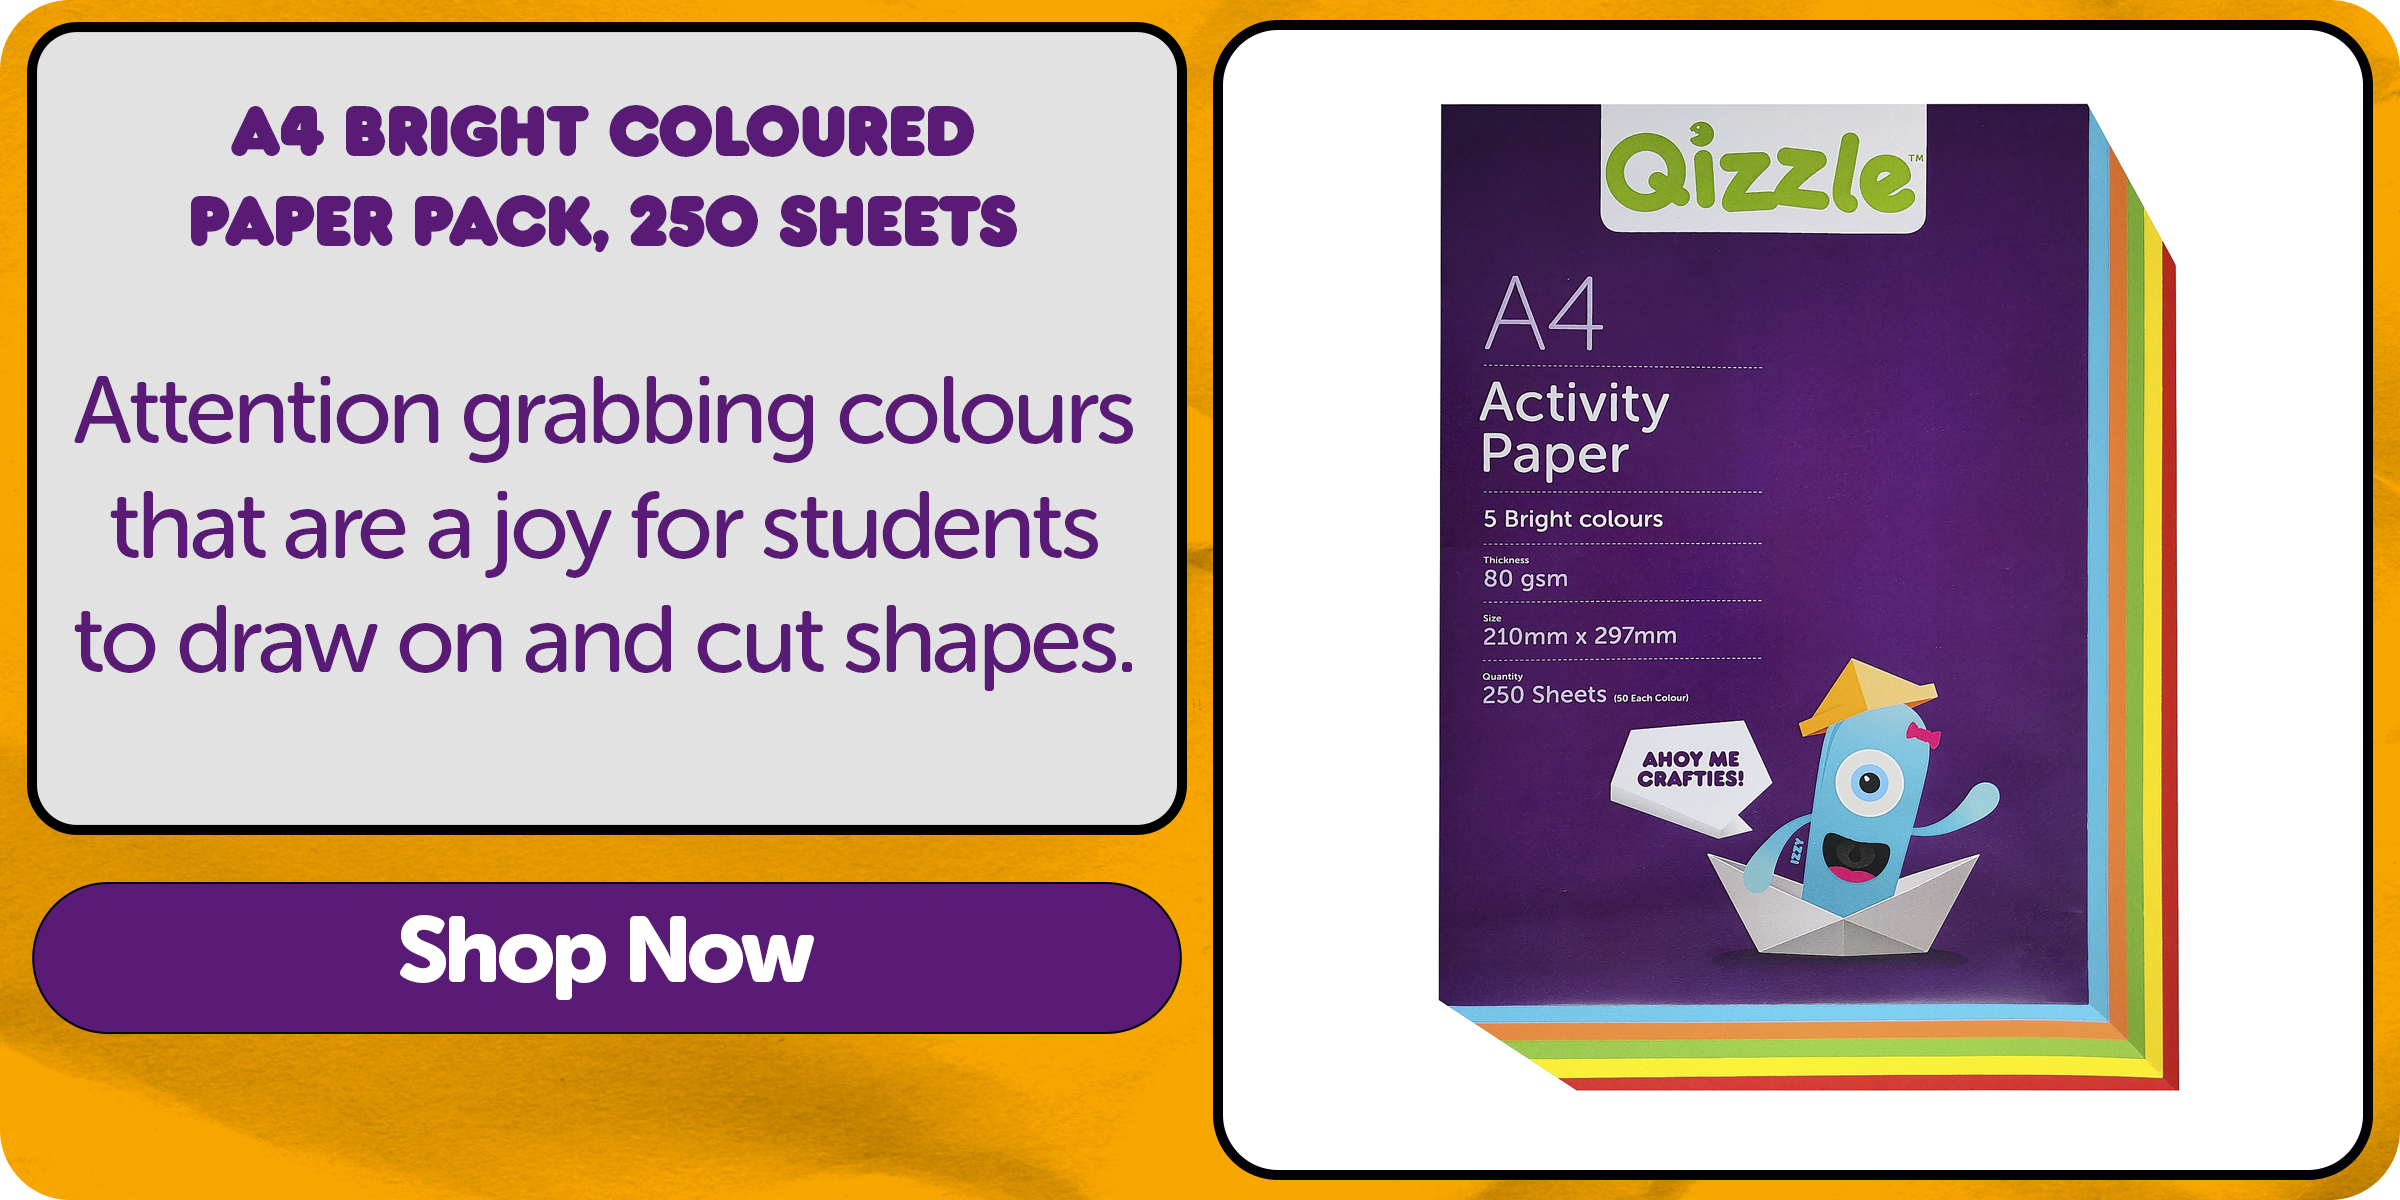 A4 Bright Coloured Paper Pack